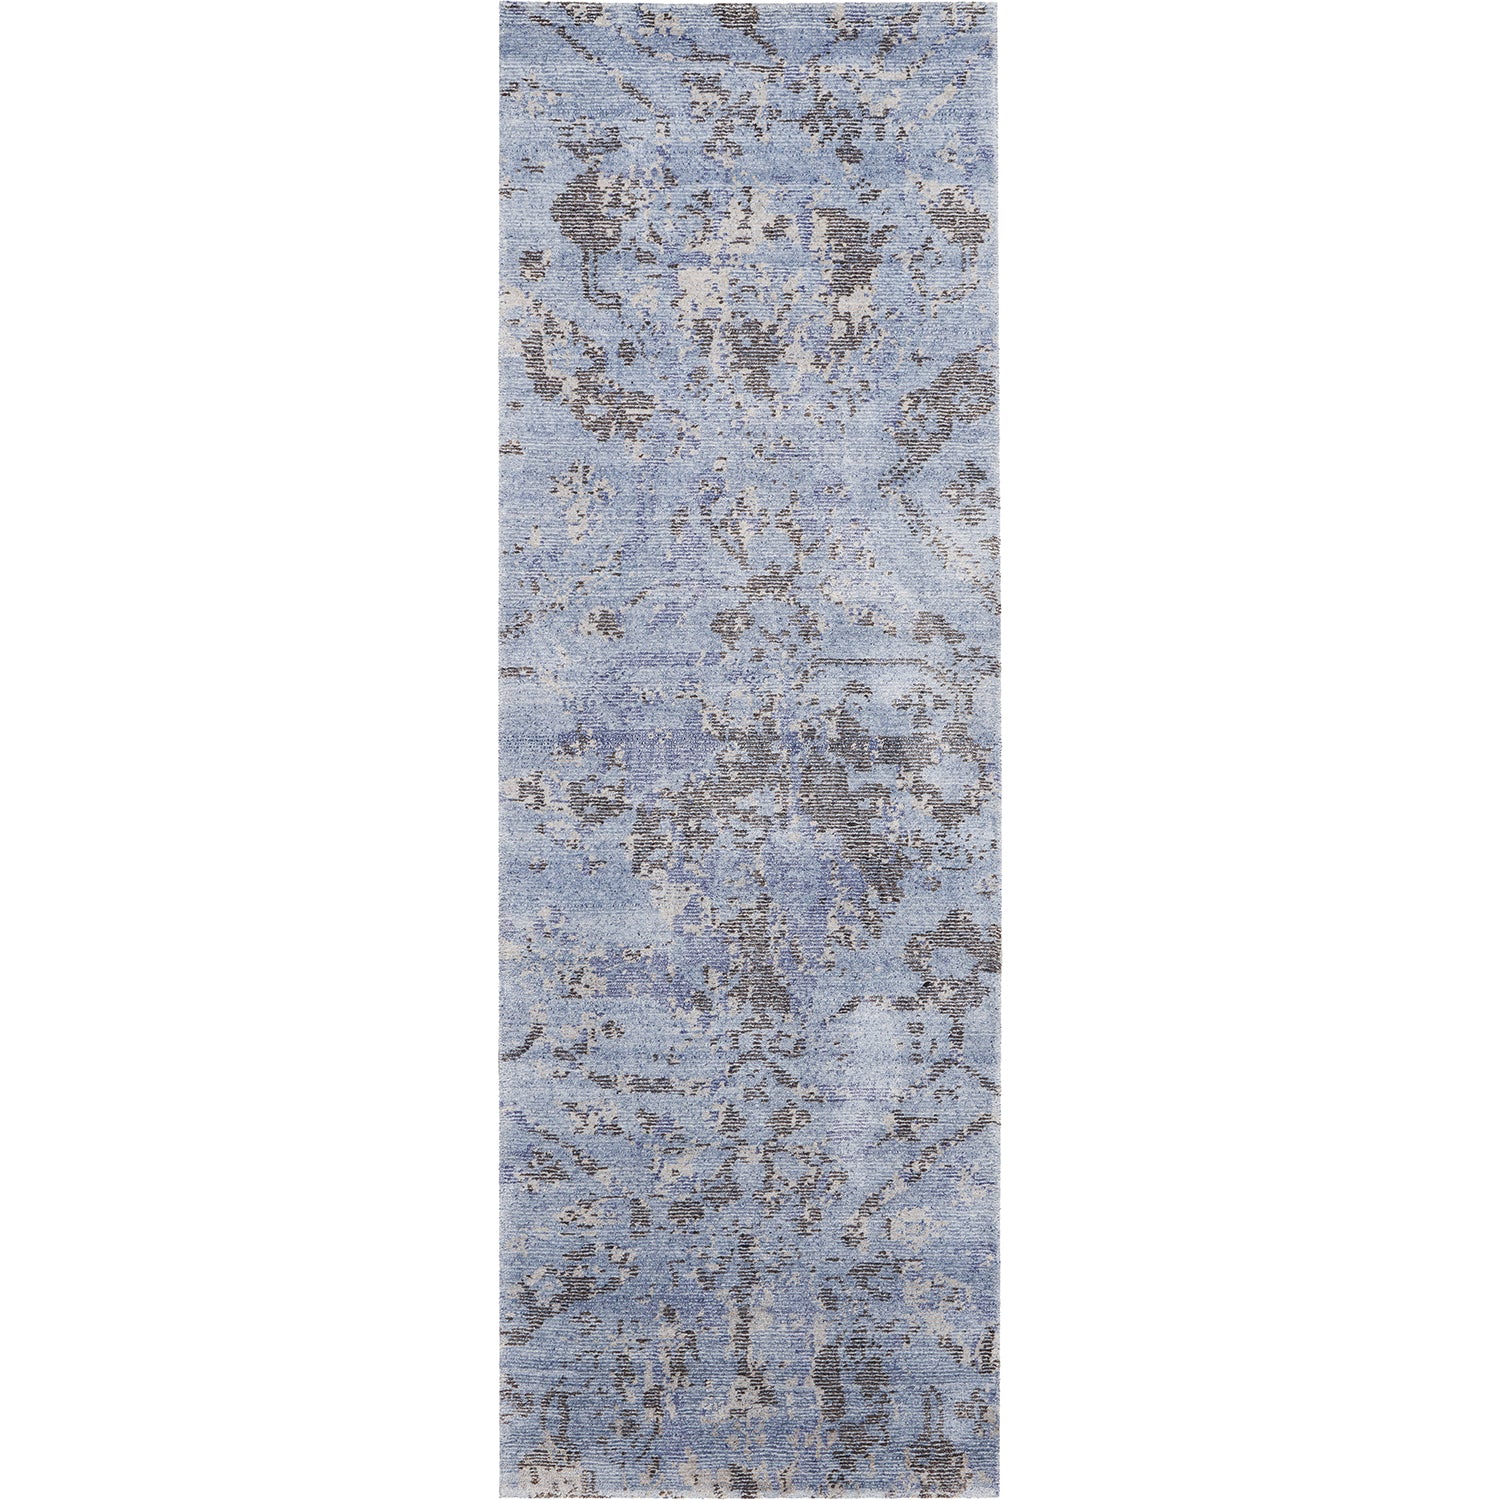 Vintage-inspired blue area rug with abstract distressed design.